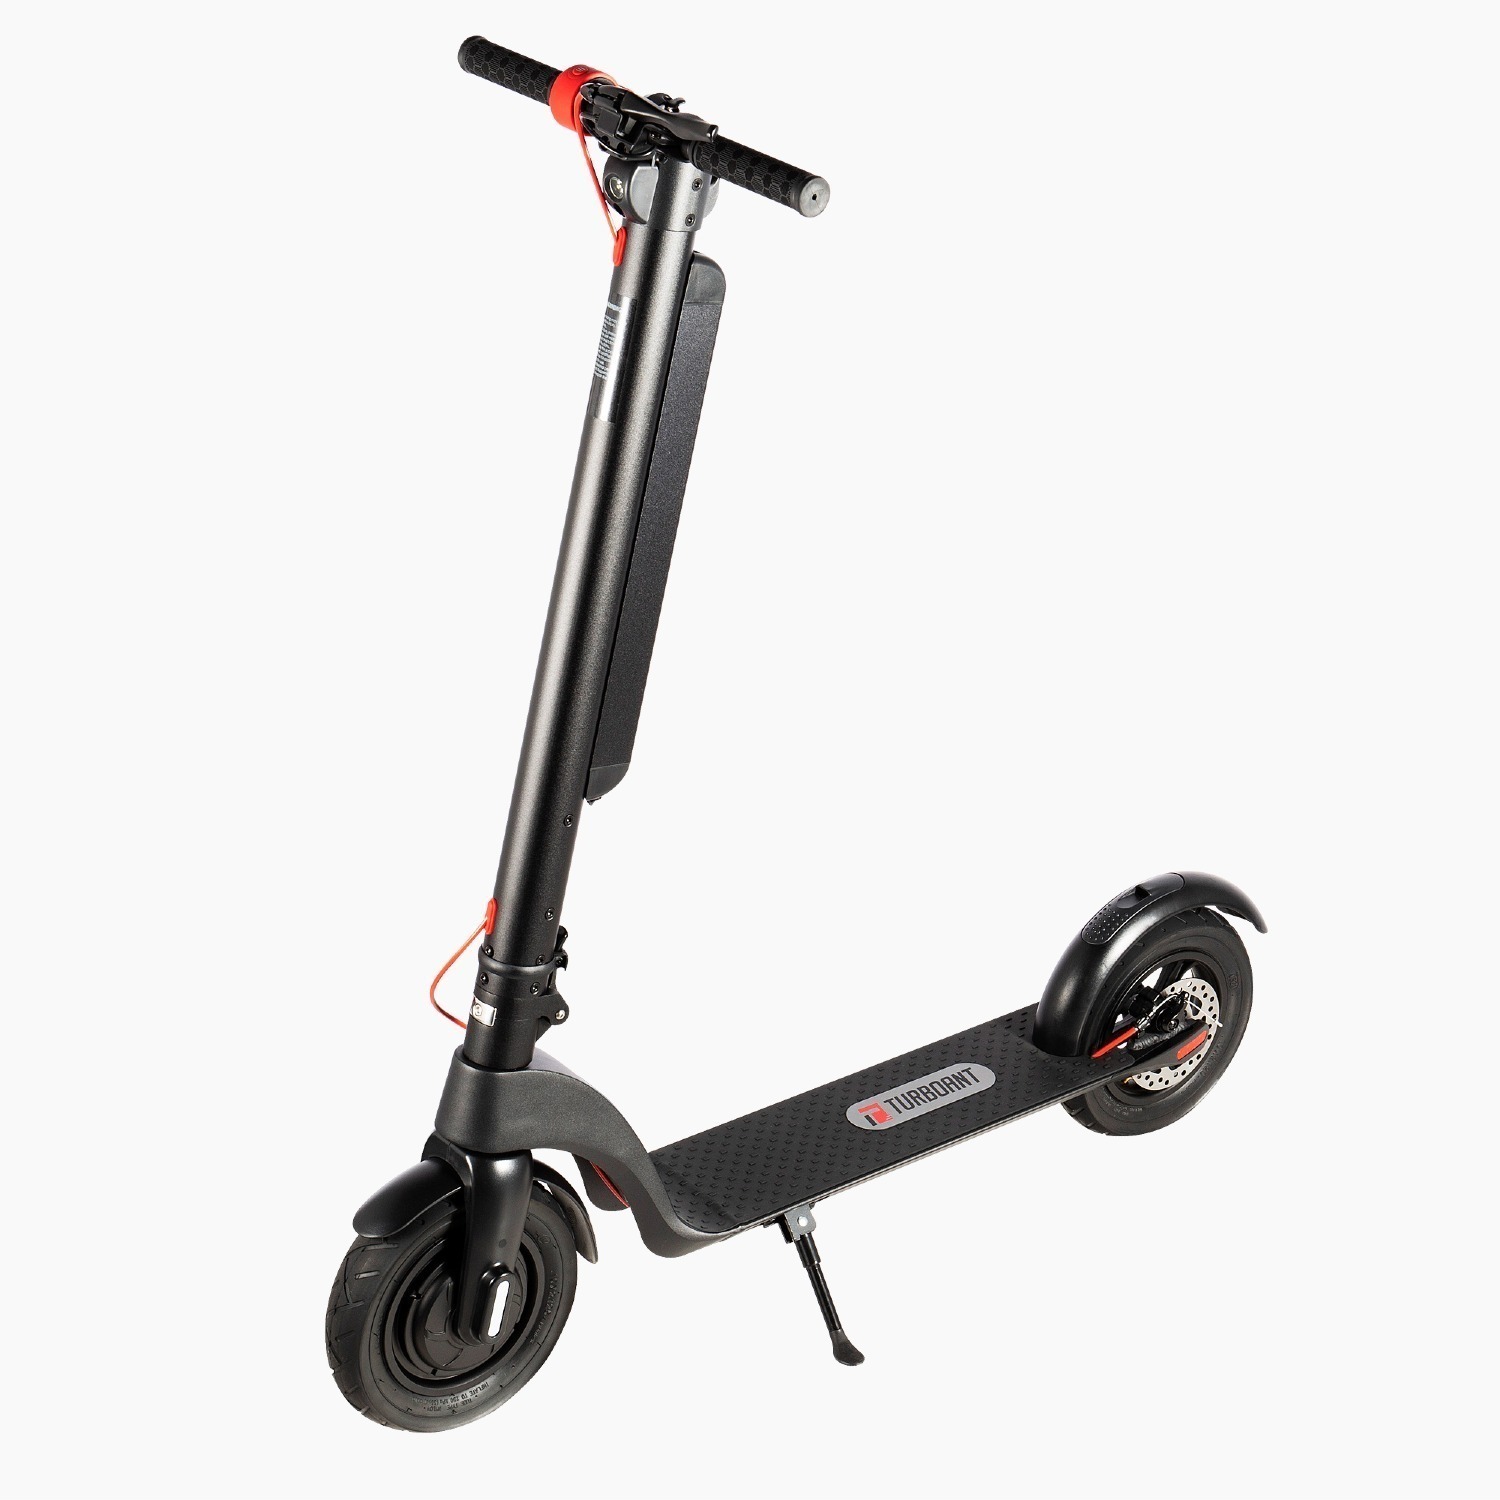 TurboAnt X7 Pro 350W Electric Scooter w/ Detachable Battery (30-Mile Range/20mph Top Speed) $380 + Free Shipping